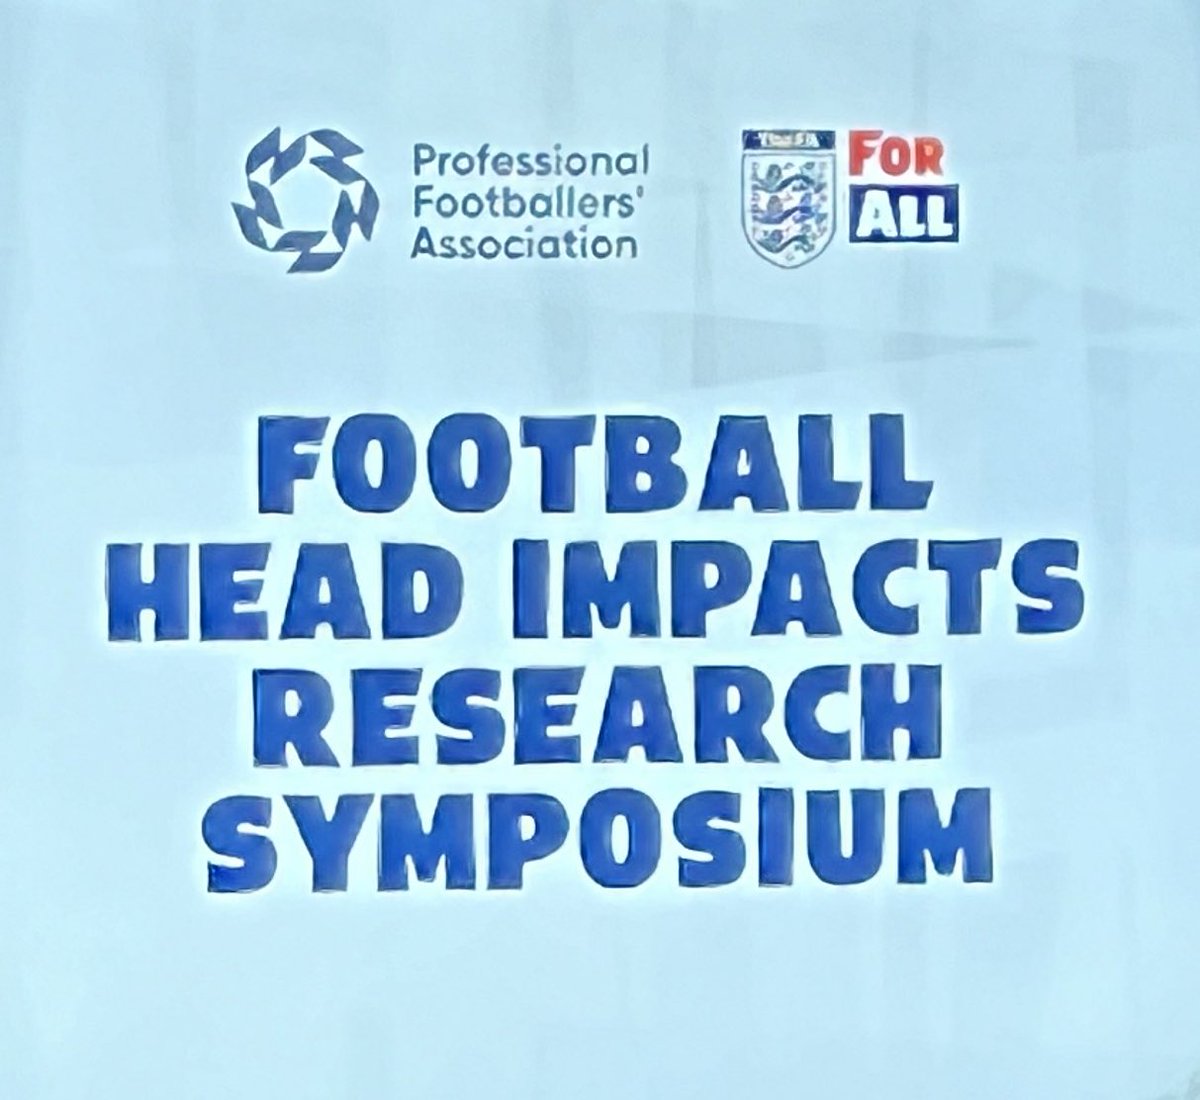 Great to see the @FootballAssoc @PFA taking the issue of head impacts and brain health so seriously — and not a bad venue for a meeting